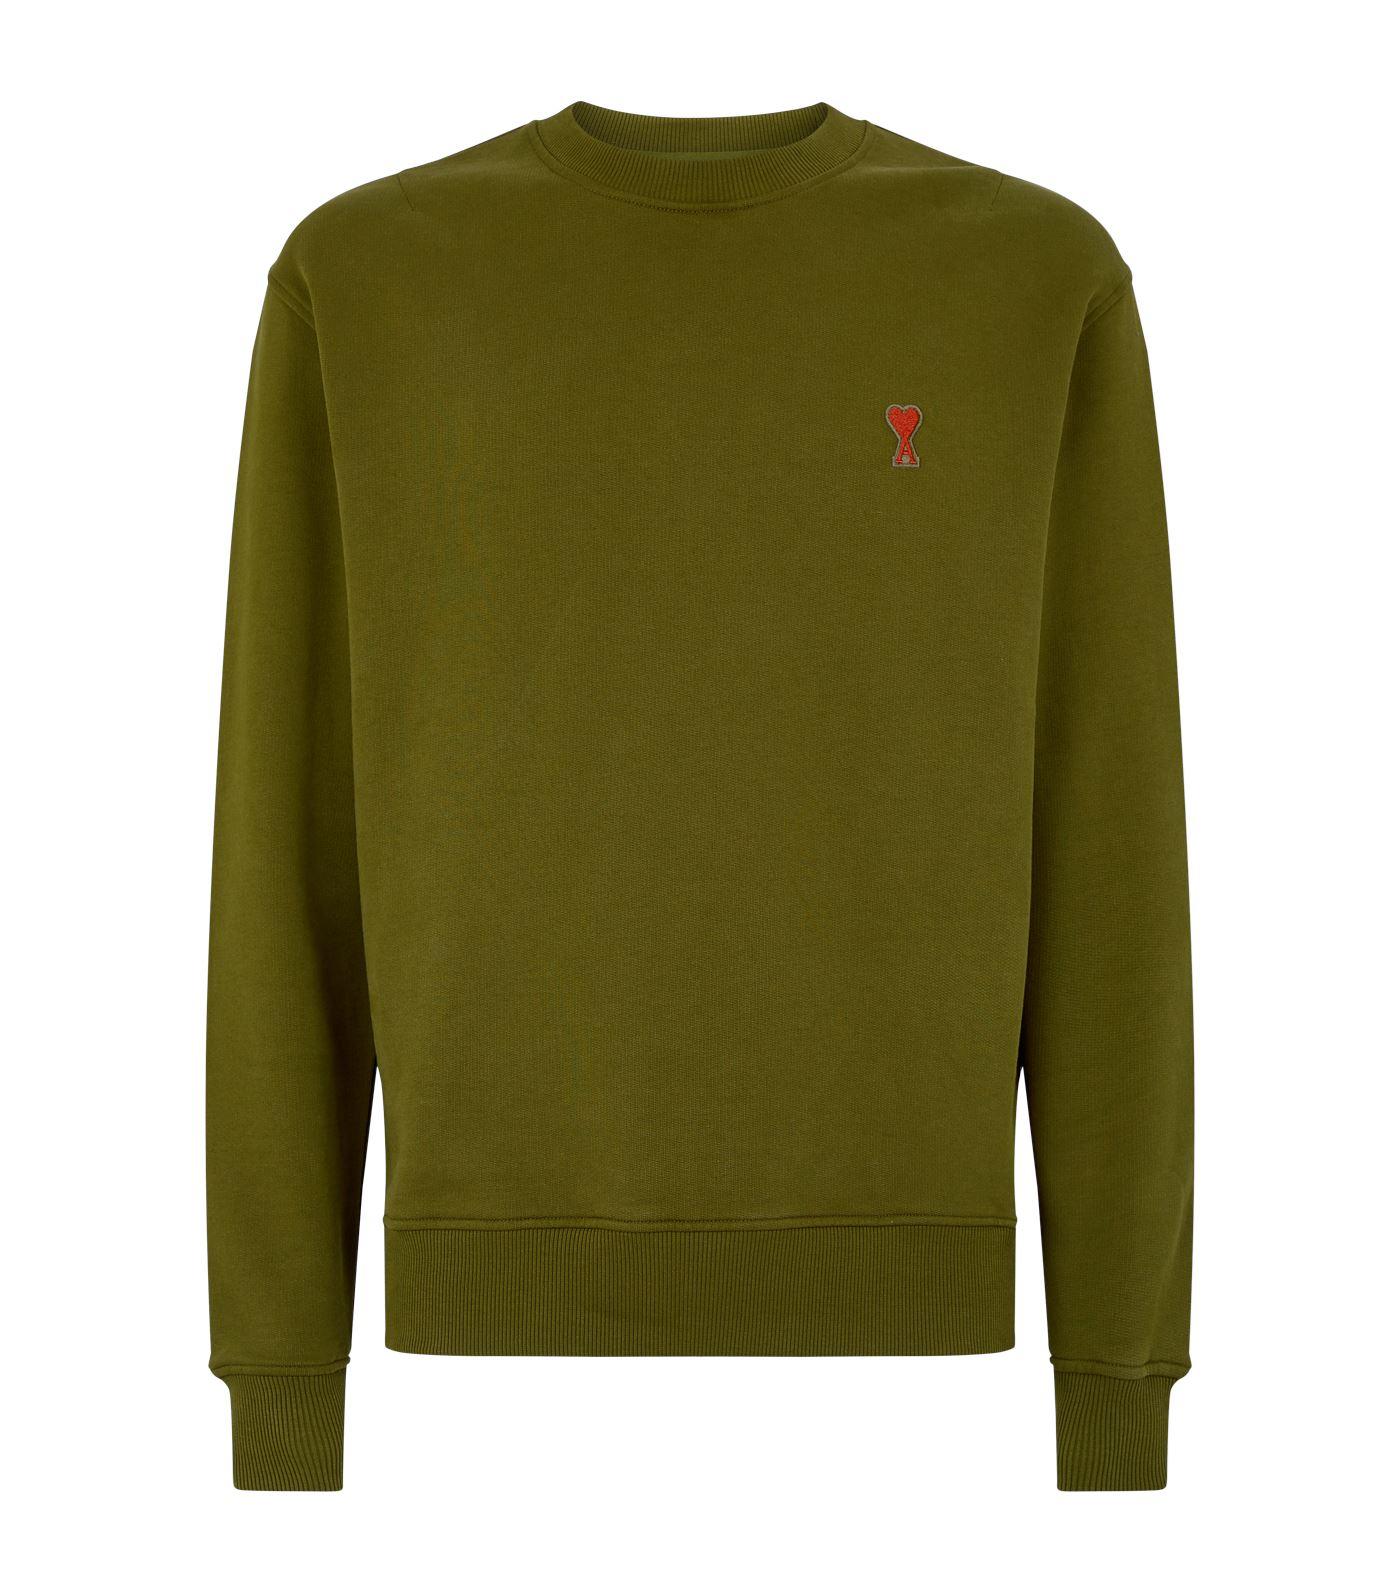 AMI Embroidered Heart Sweatshirt in Green for Men - Lyst